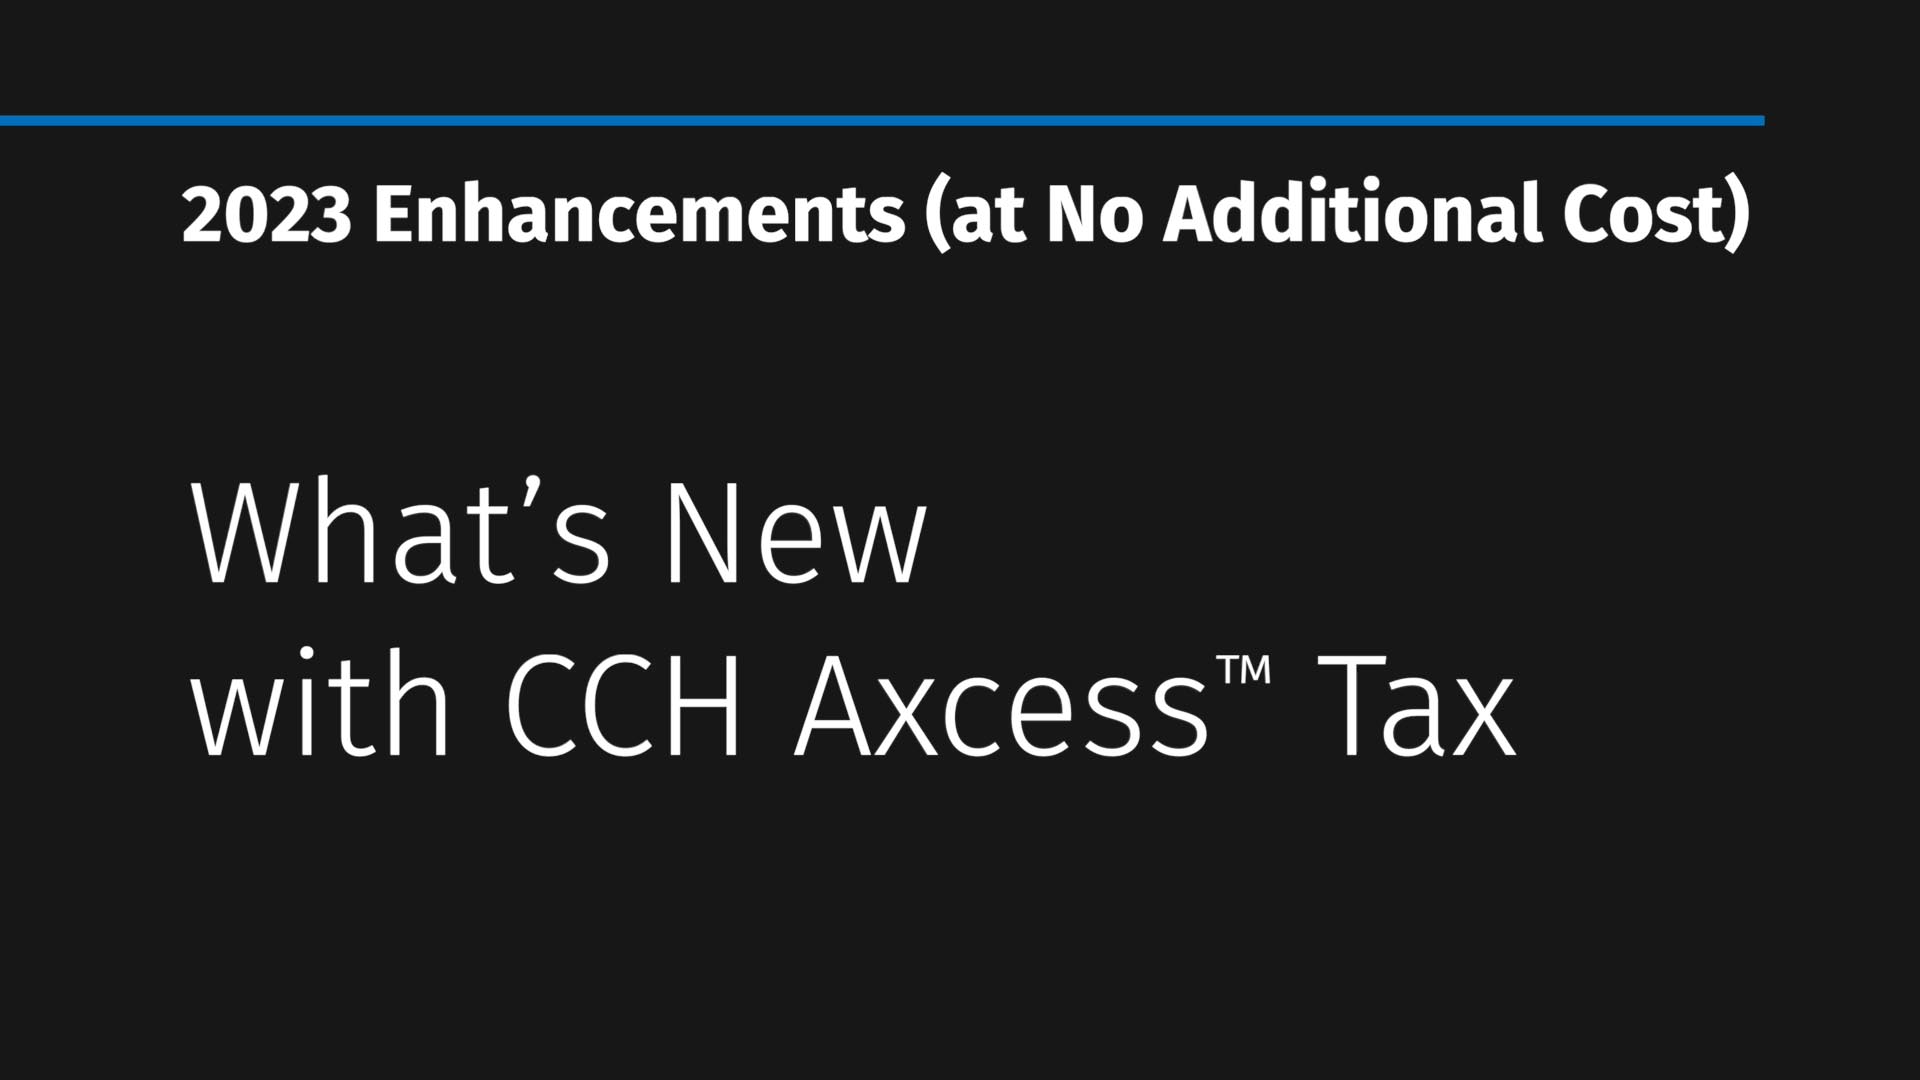 What's New with CCH Axcess Tax